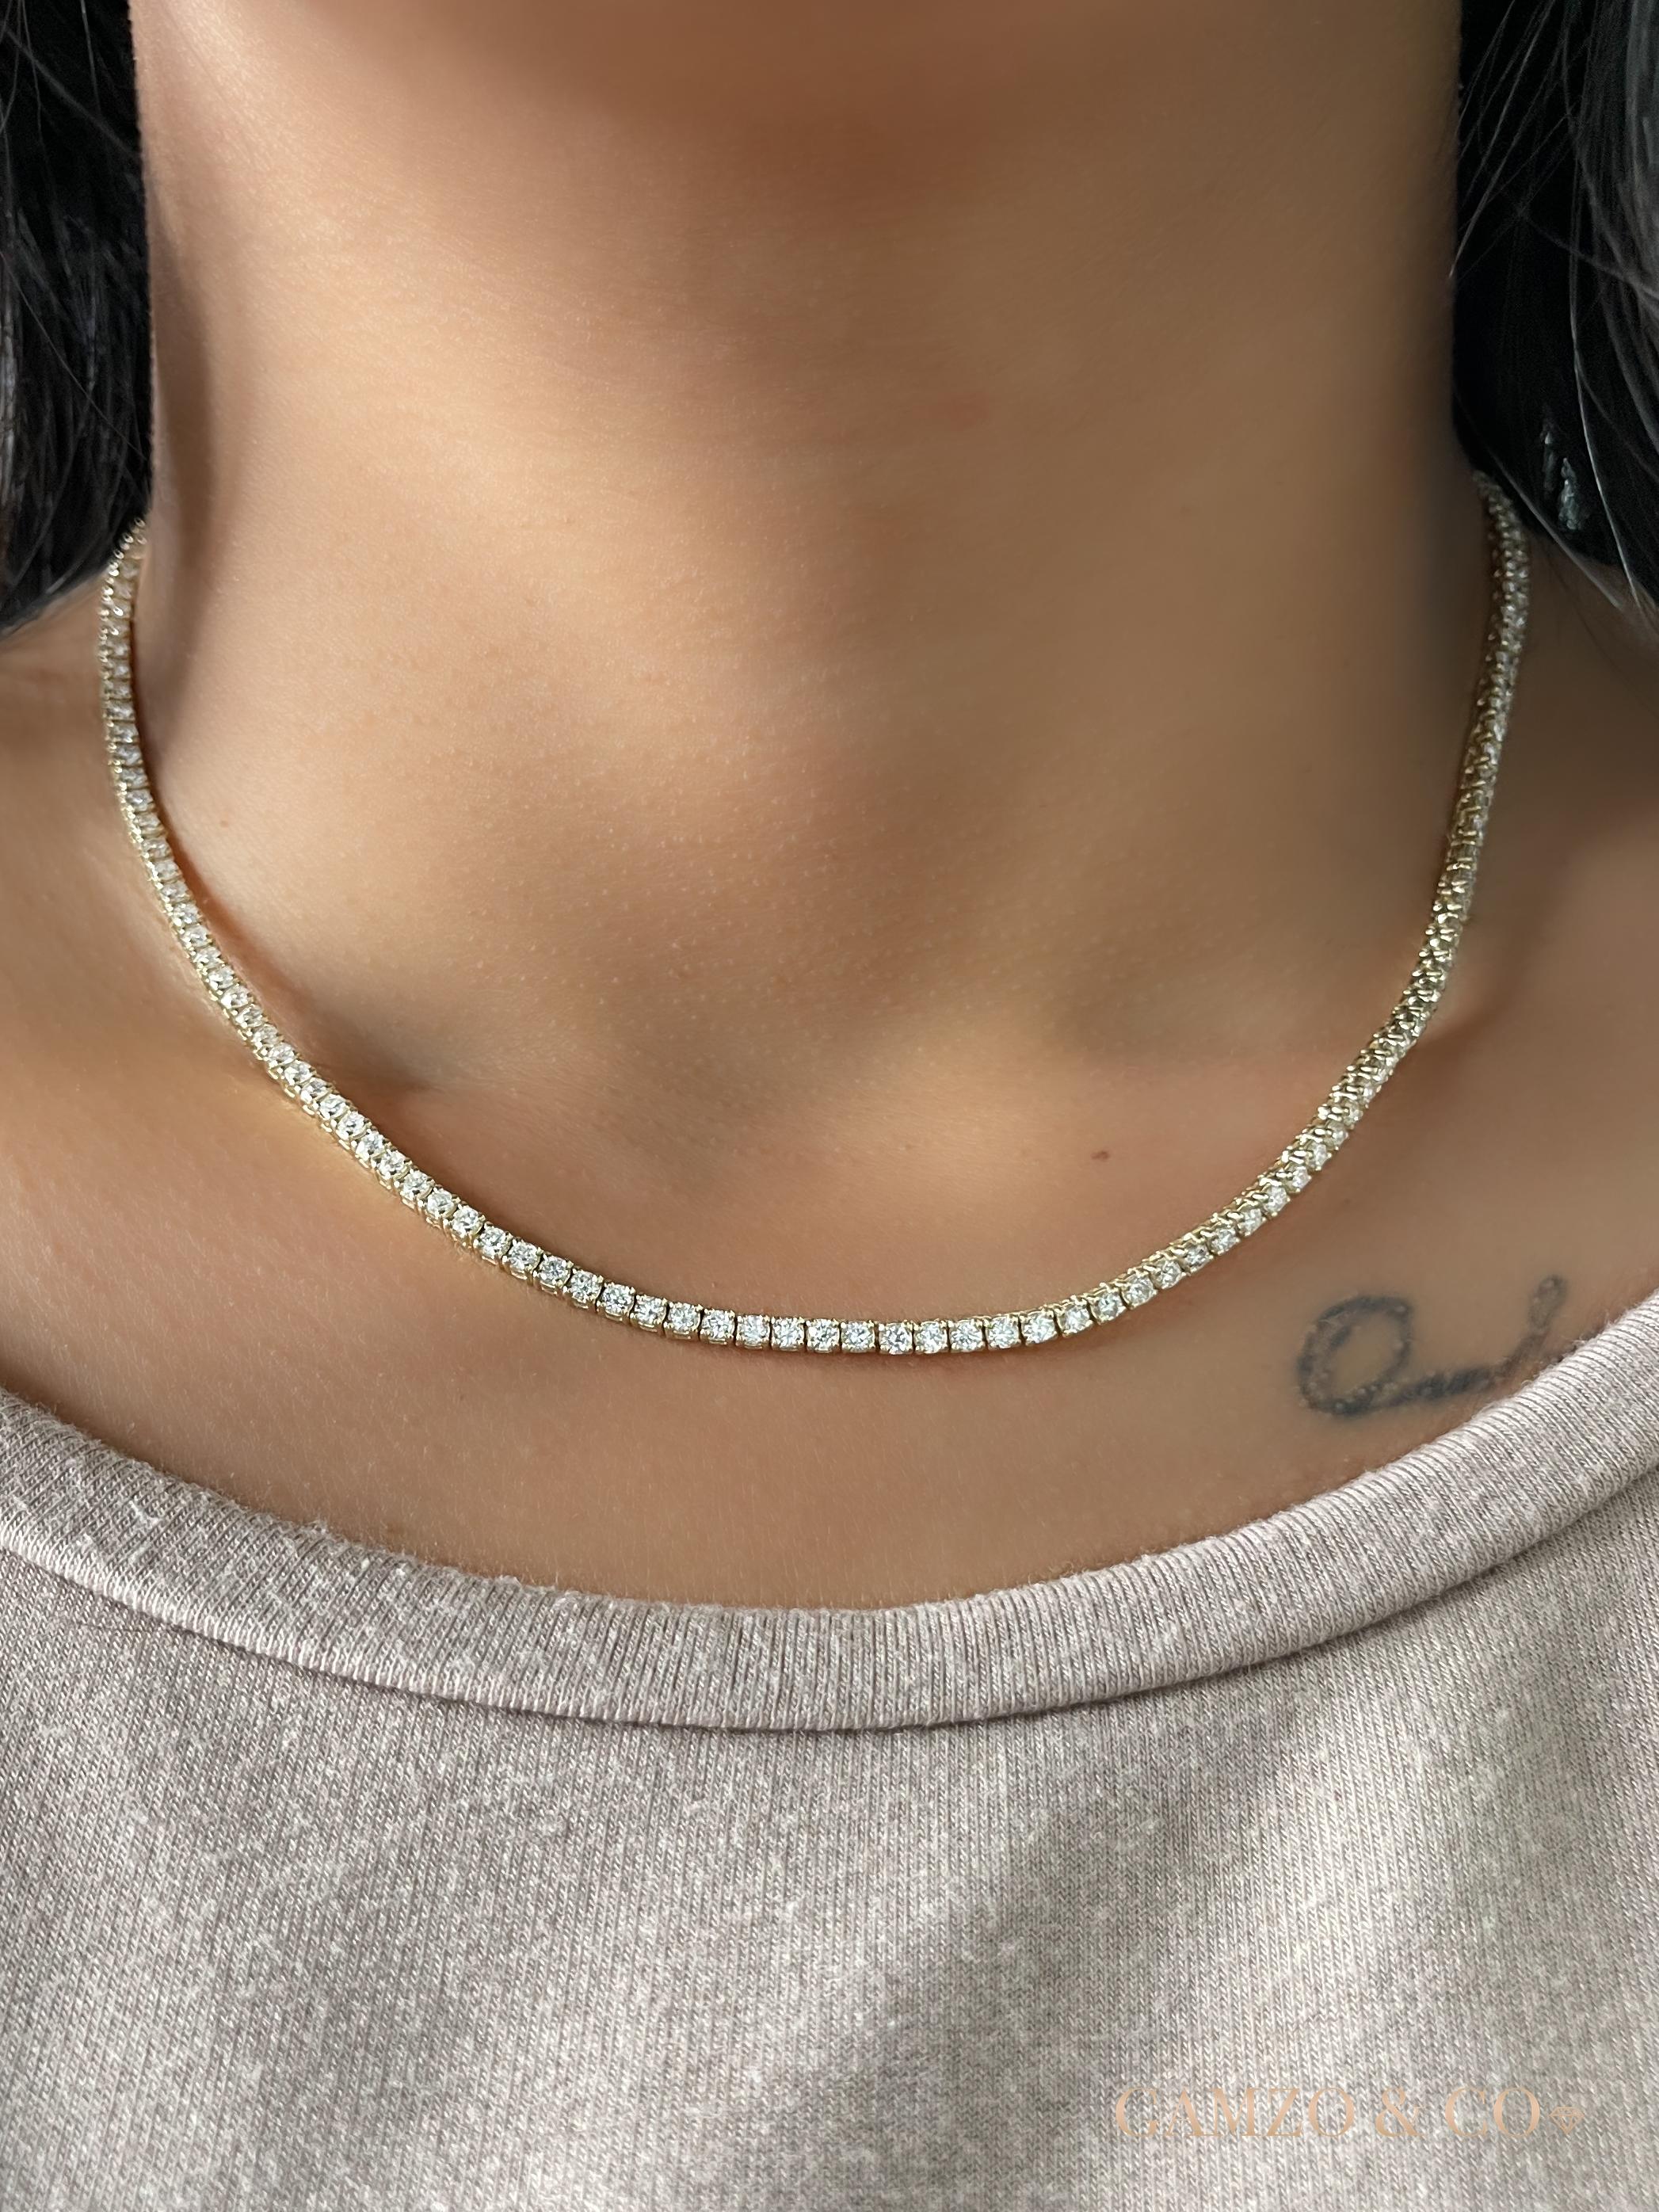 5 Carats of round diamond set on a shared prong setting in 14k white gold to create a timeless necklace. 

Metal: 14k Gold
Diamond Cut: Round
Total Approx. Diamond Carats: 5ct
Diamond Clarity: VS
Diamond Color: F-G
Size: 22
Color: White